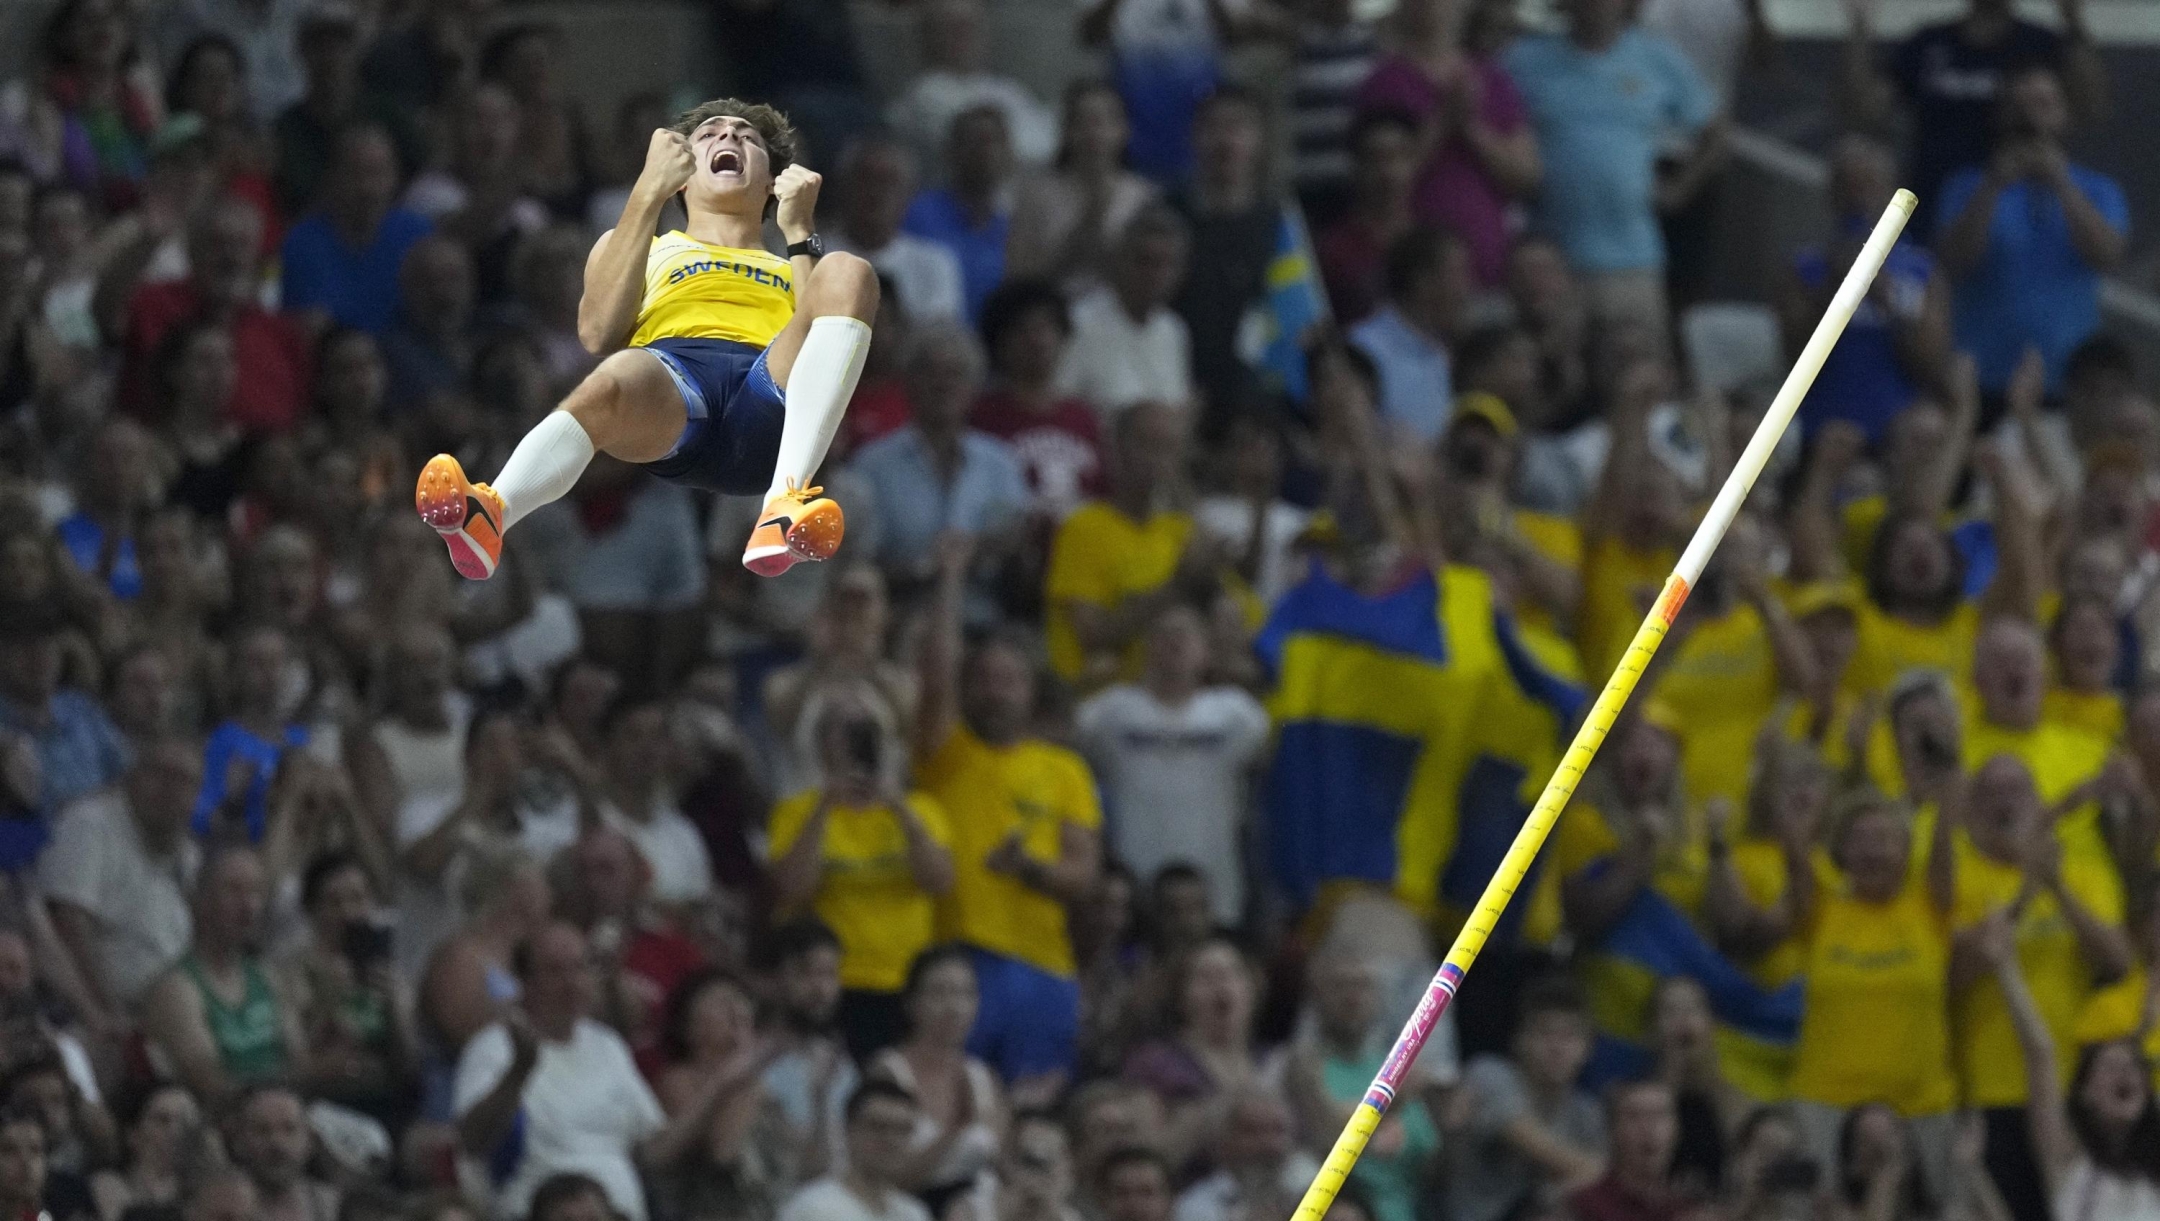 Fabs on the stands cheer as Armand Duplantis, of Sweden, reacts after a successful attempt in the Men's pole vault final during the World Athletics Championships in Budapest, Hungary, Saturday, Aug. 26, 2023. (AP Photo/Bernat Armangue)